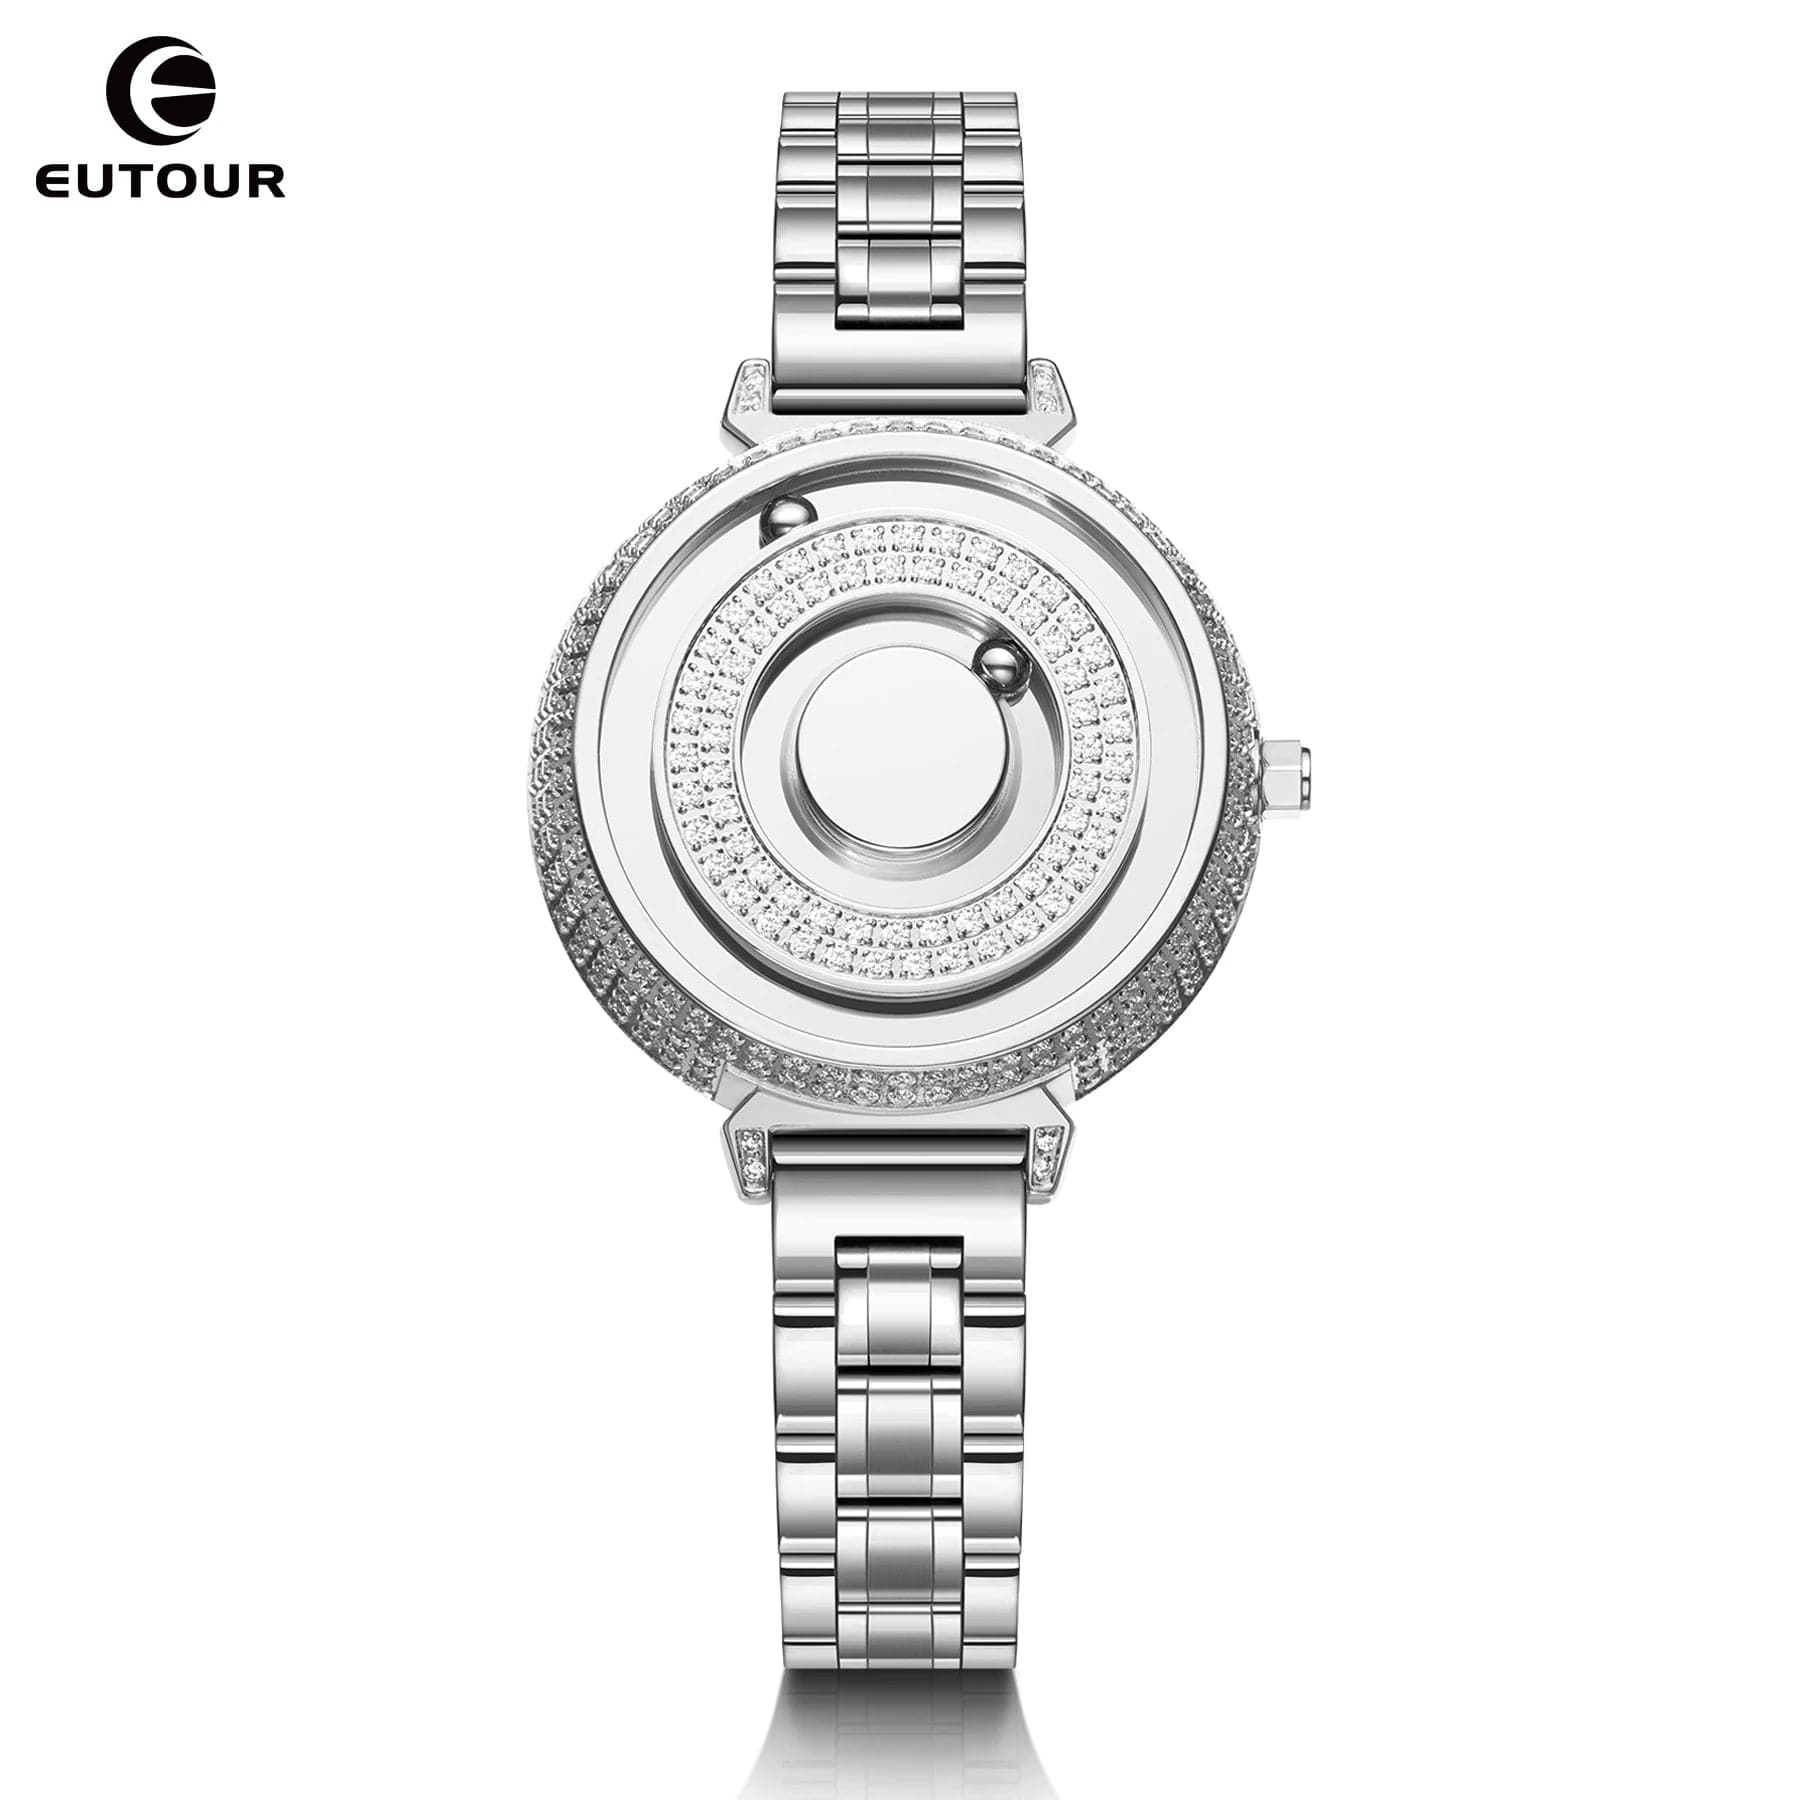 Limited Edition Crystal Set Quartz Watch - EUTOUR Stainless Steel Bracelet Clasp, 3Bar Water Resistance, 36mm Dial Diameter - Wandering Woman